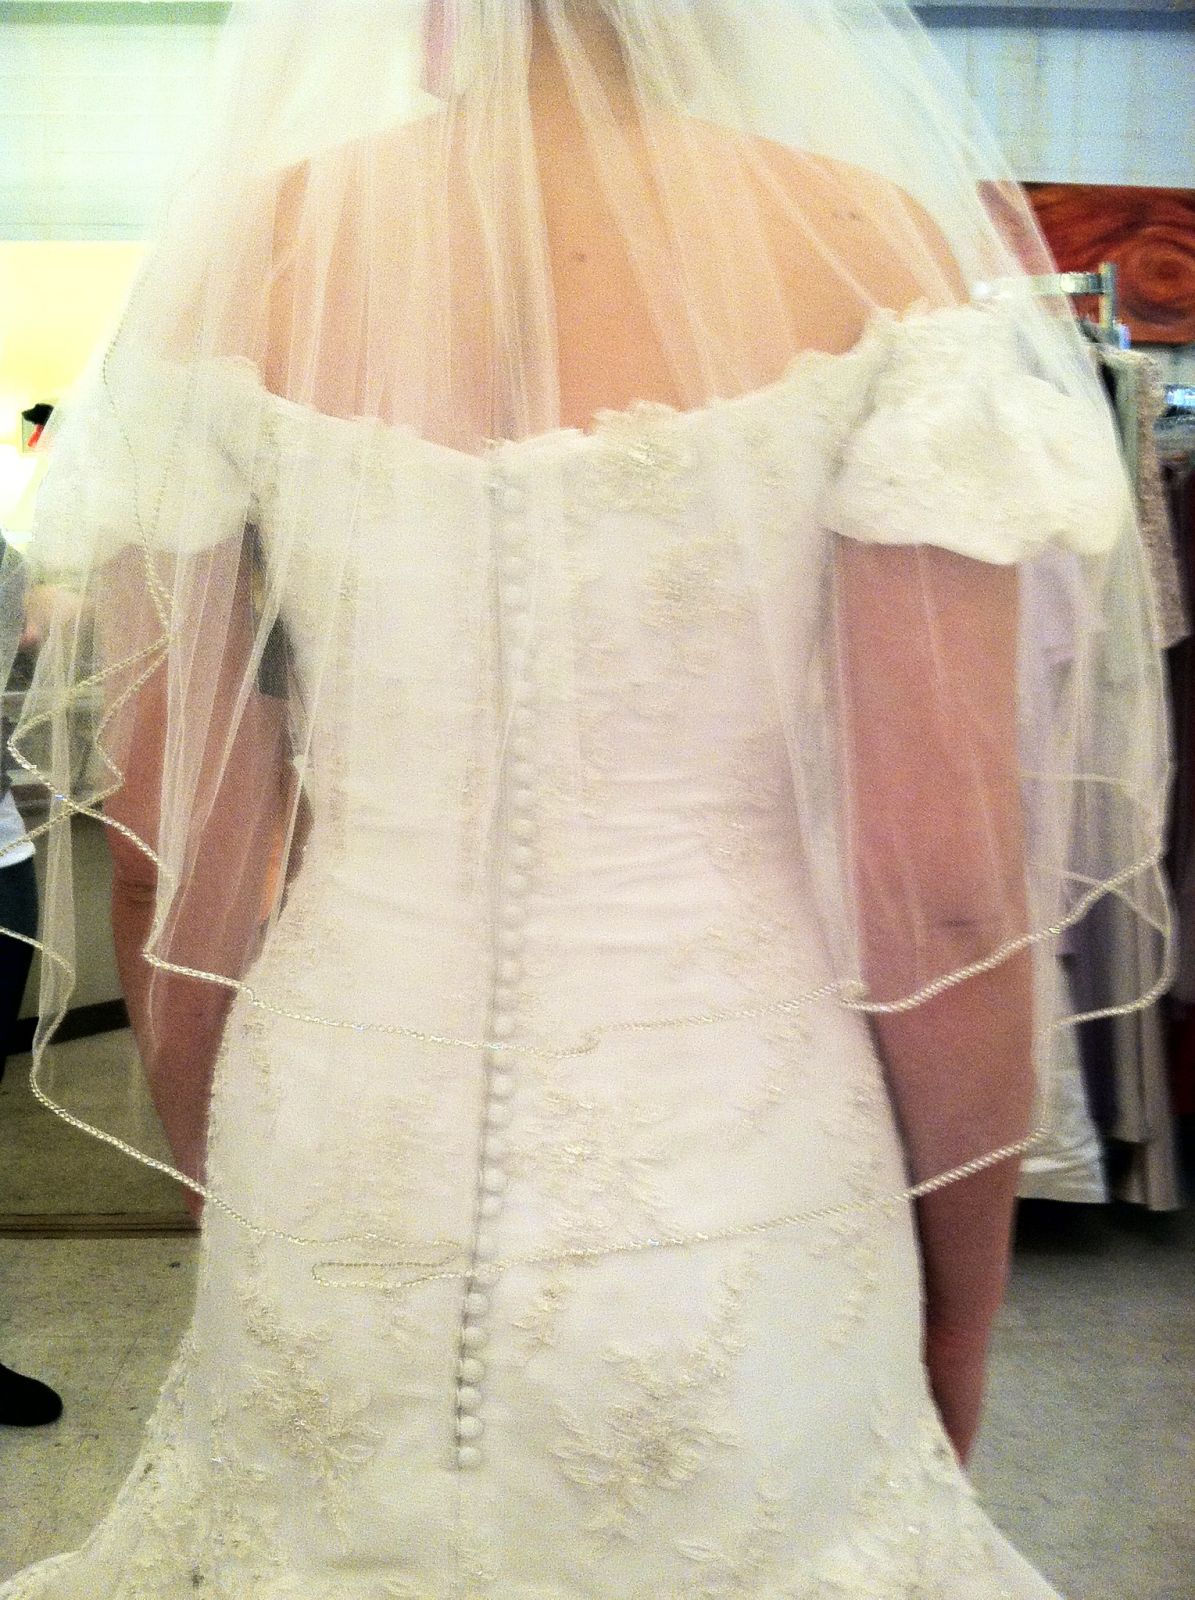 Jasmine Couture Bridal Gown, Size 12, Retailed for $1,290